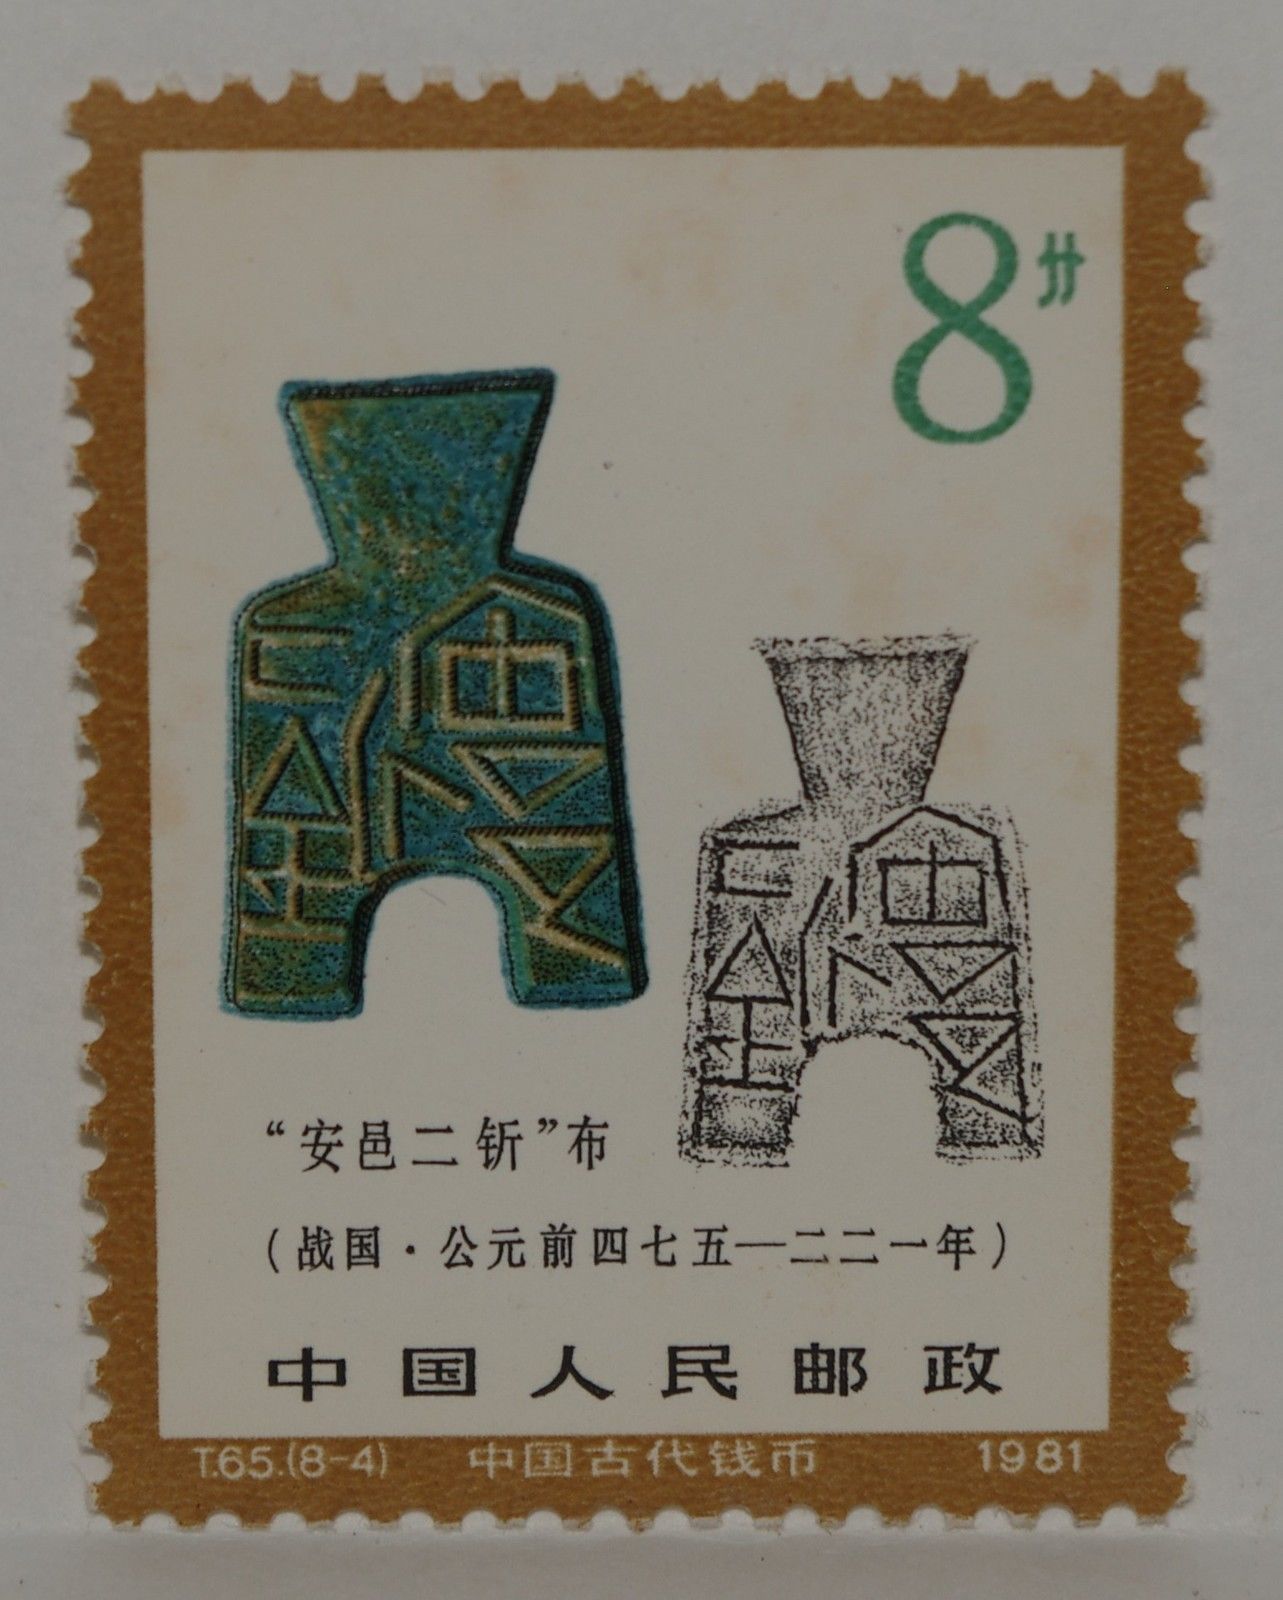 Primary image for VINTAGE STAMPS CHINA CHINESE 8 EIGHT F FEN ANCIENT COINS X1 B24